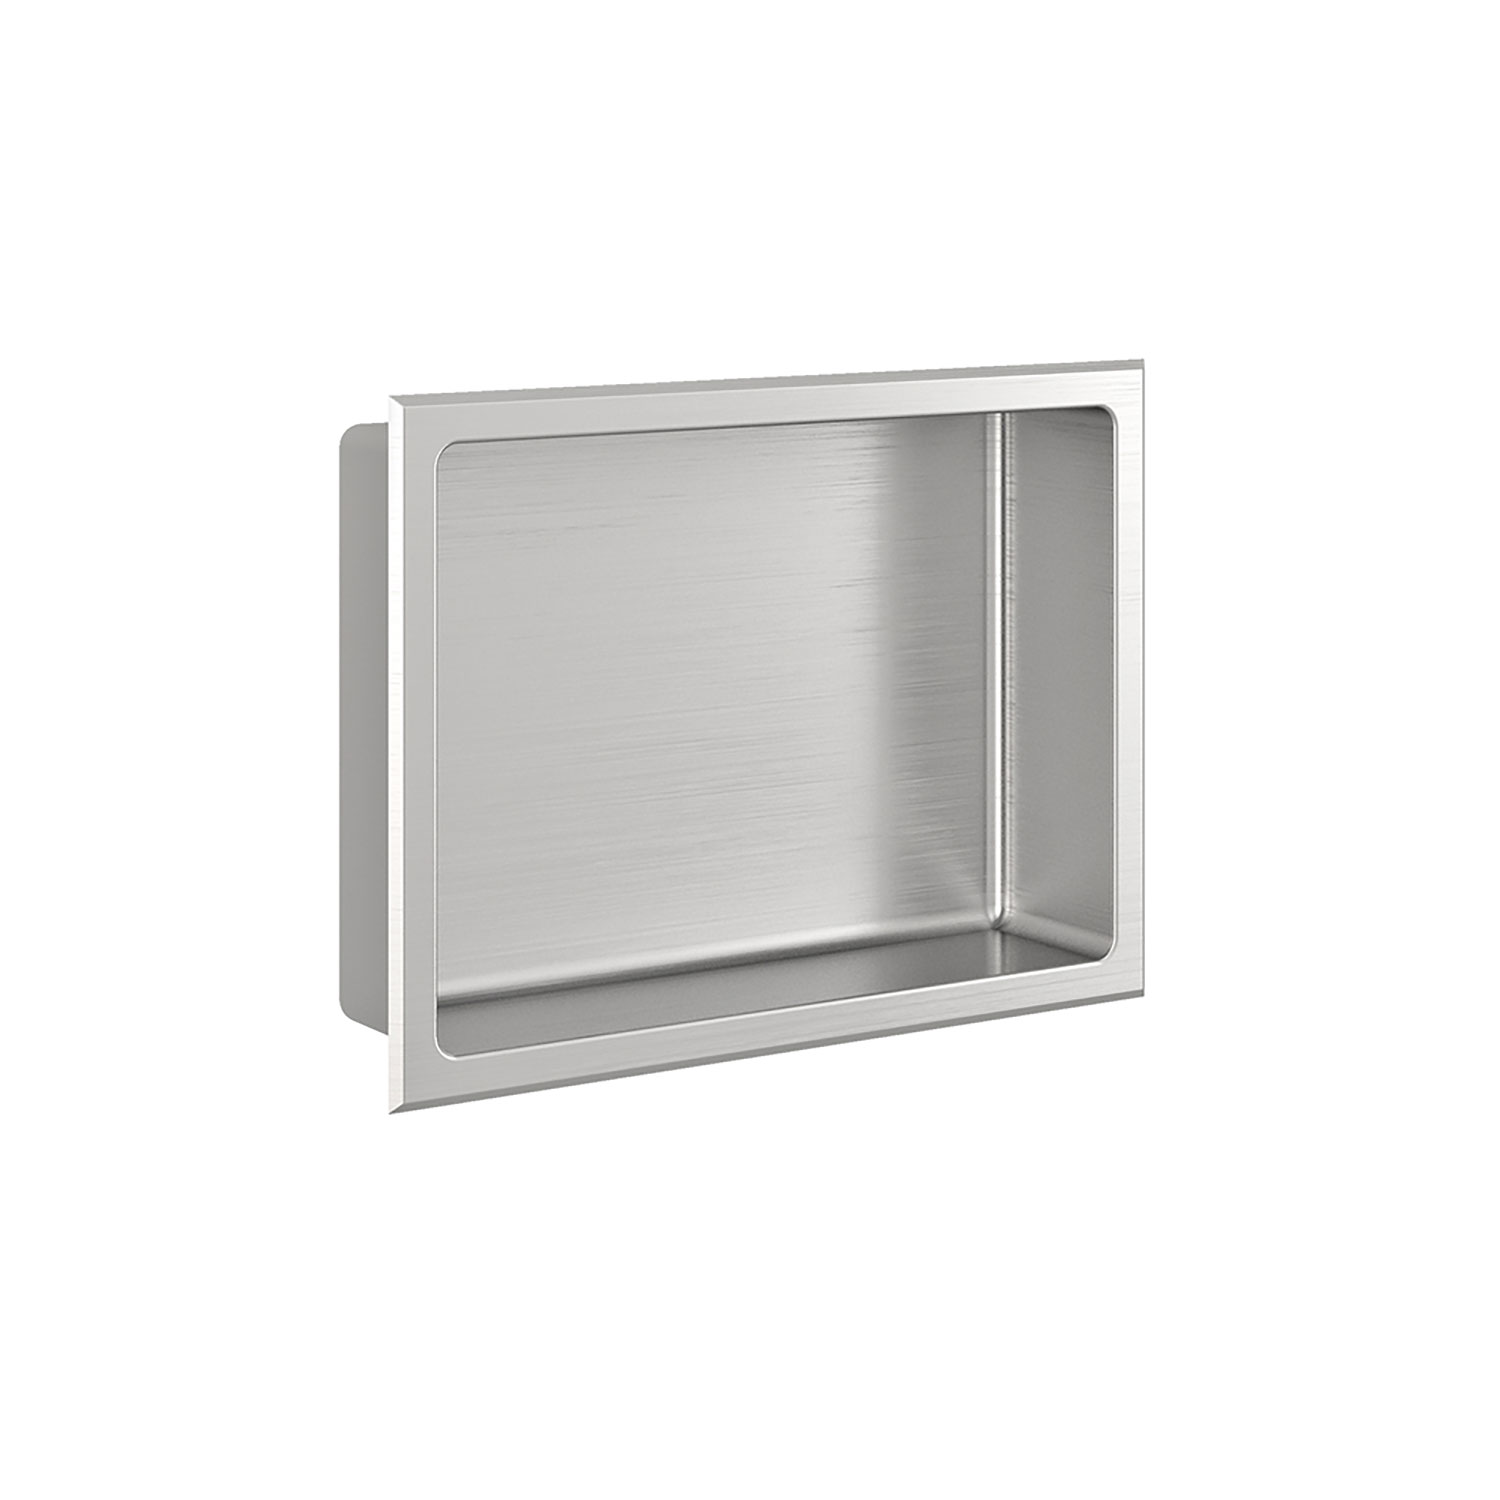 Brushed stainless steel niche 16